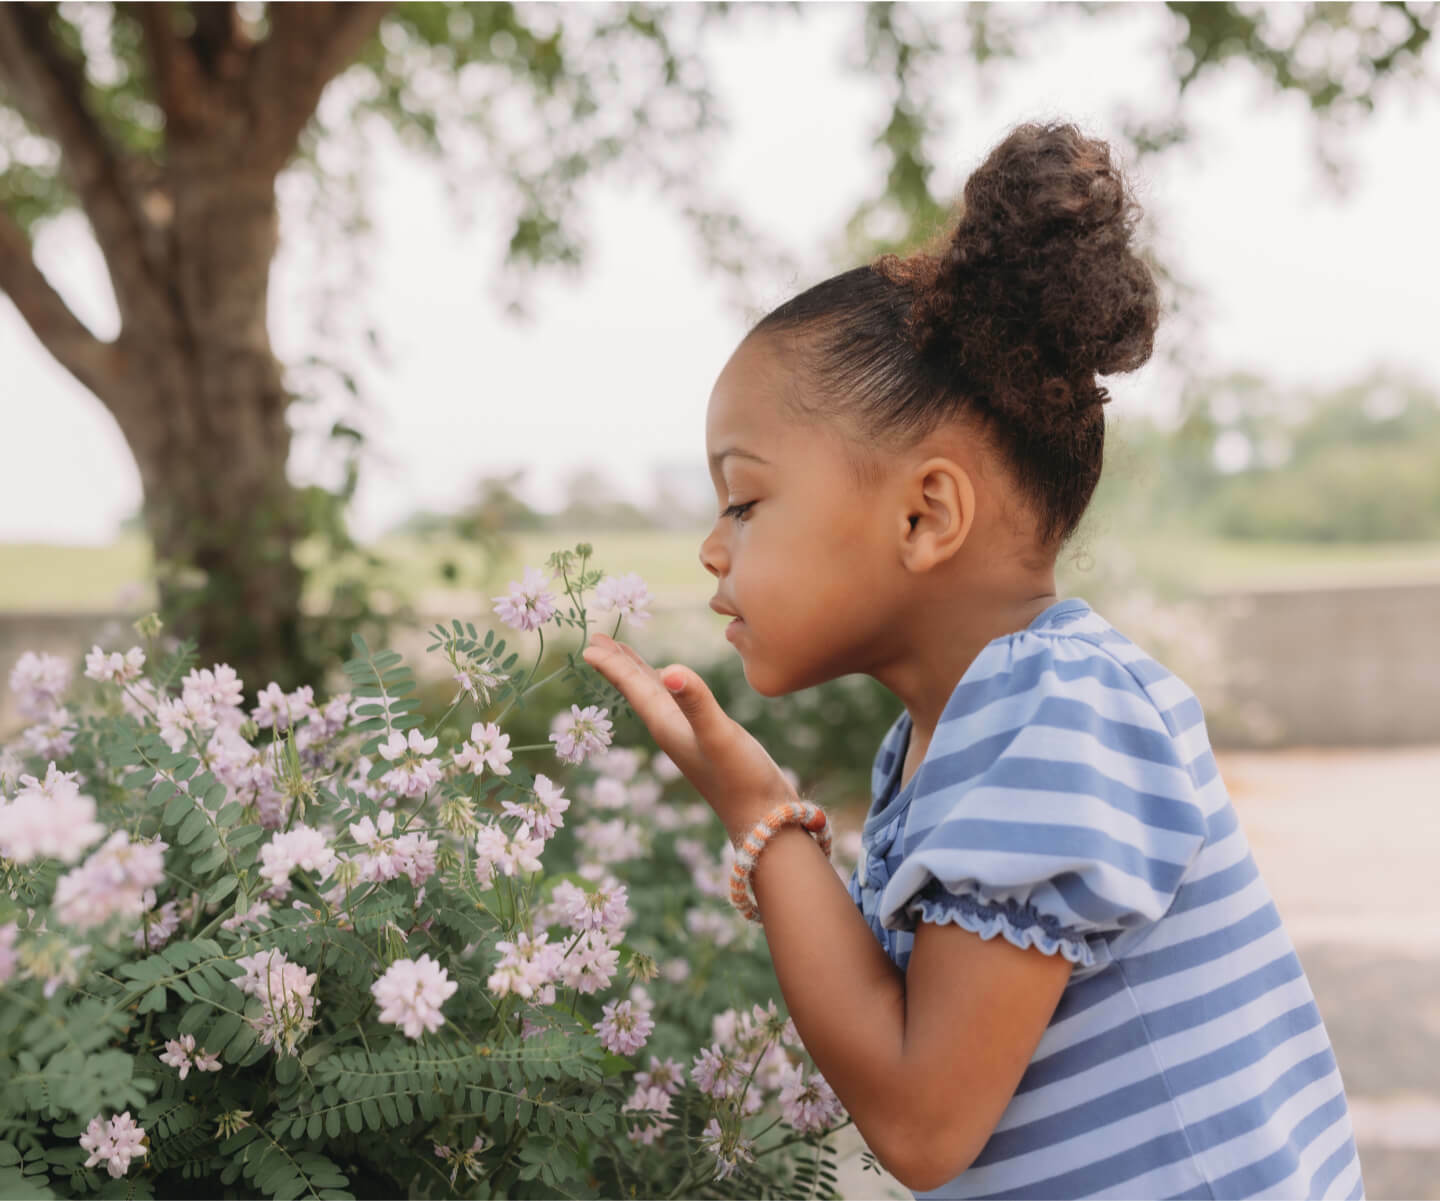 A young girl joyfully smelling flowers in a park